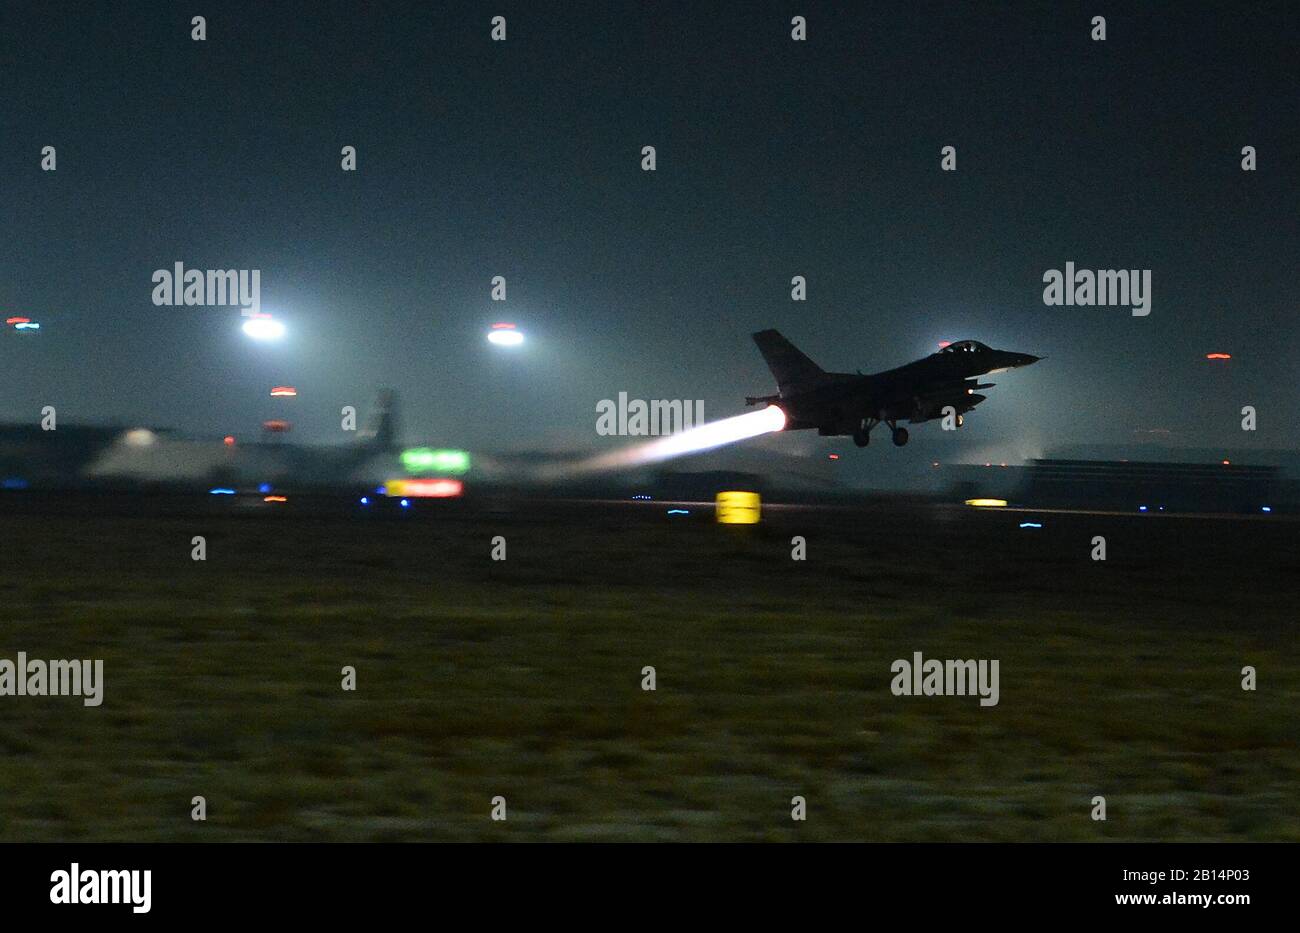 A U.S. Air Force F-16 Fighting Falcon assigned to the 77th Fighter Squadron, takes off Nov. 21, 2017, at Bagram Airfield, Afghanistan. The launch was used in support of a new offensive campaign. Afghan National Defense and Security Forces (ANDSF) and United States Forces-Afghanistan (USFOR-A) launched a series of ongoing attacks to hit Taliban revenue streams. Together, Afghan and U.S. forces conducted combined operations to strike drug labs and command-and-control nodes in northern Helmand province. These types of strikes represent the highest level of trust and cooperation between ANDSF and Stock Photo